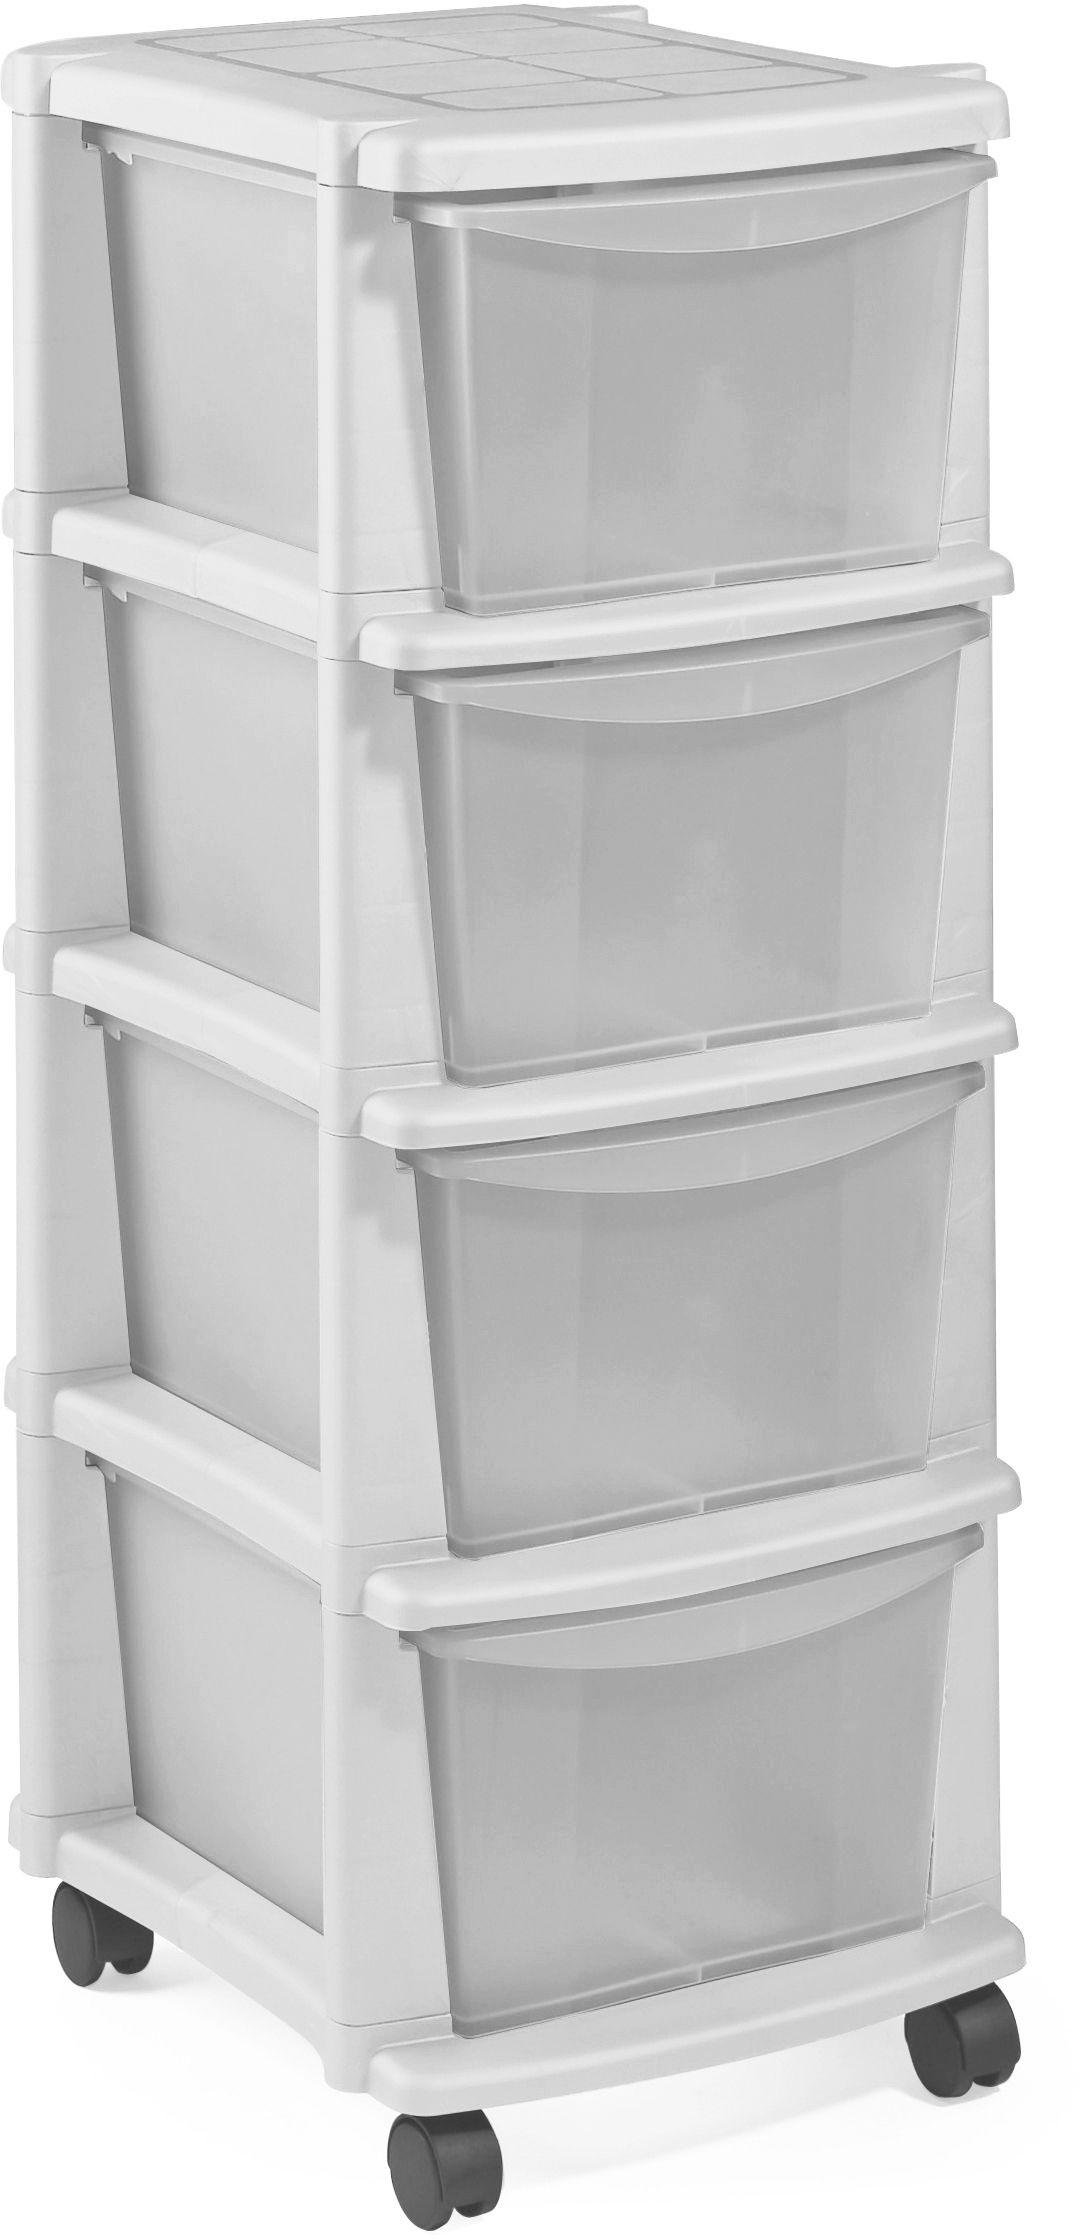 Plastic Drawer Unit Find It For Less